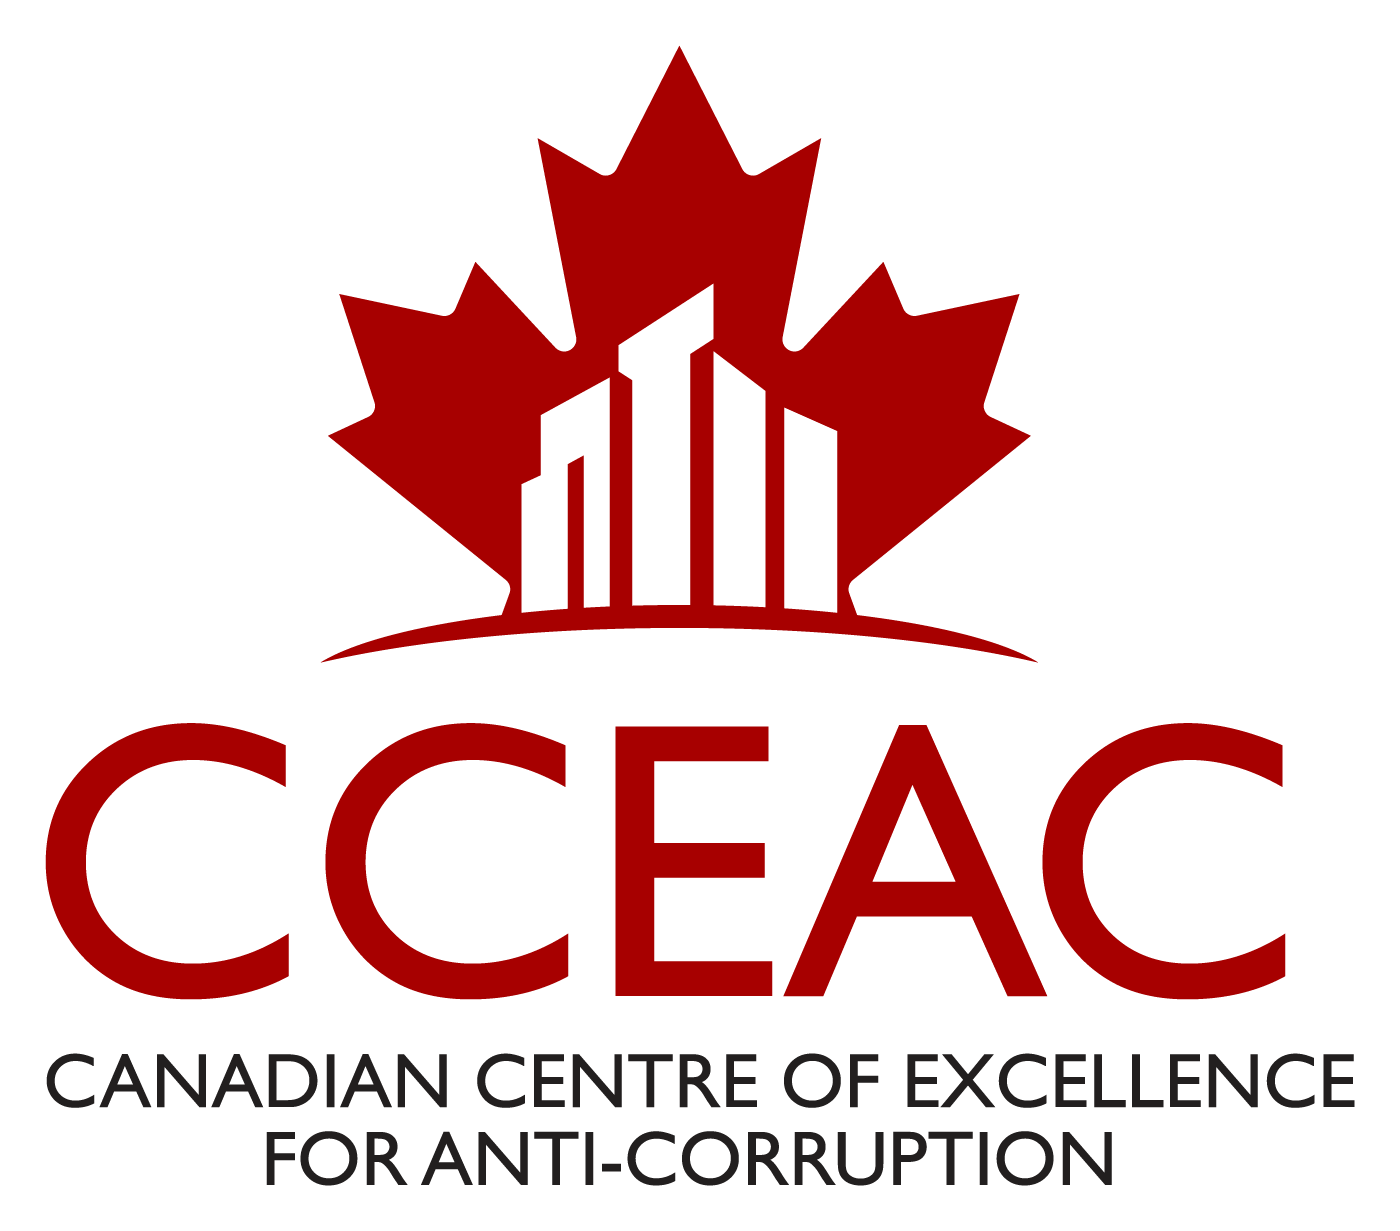 Canadian Centre of Excellence for Anti-Corruption (CCEAC)